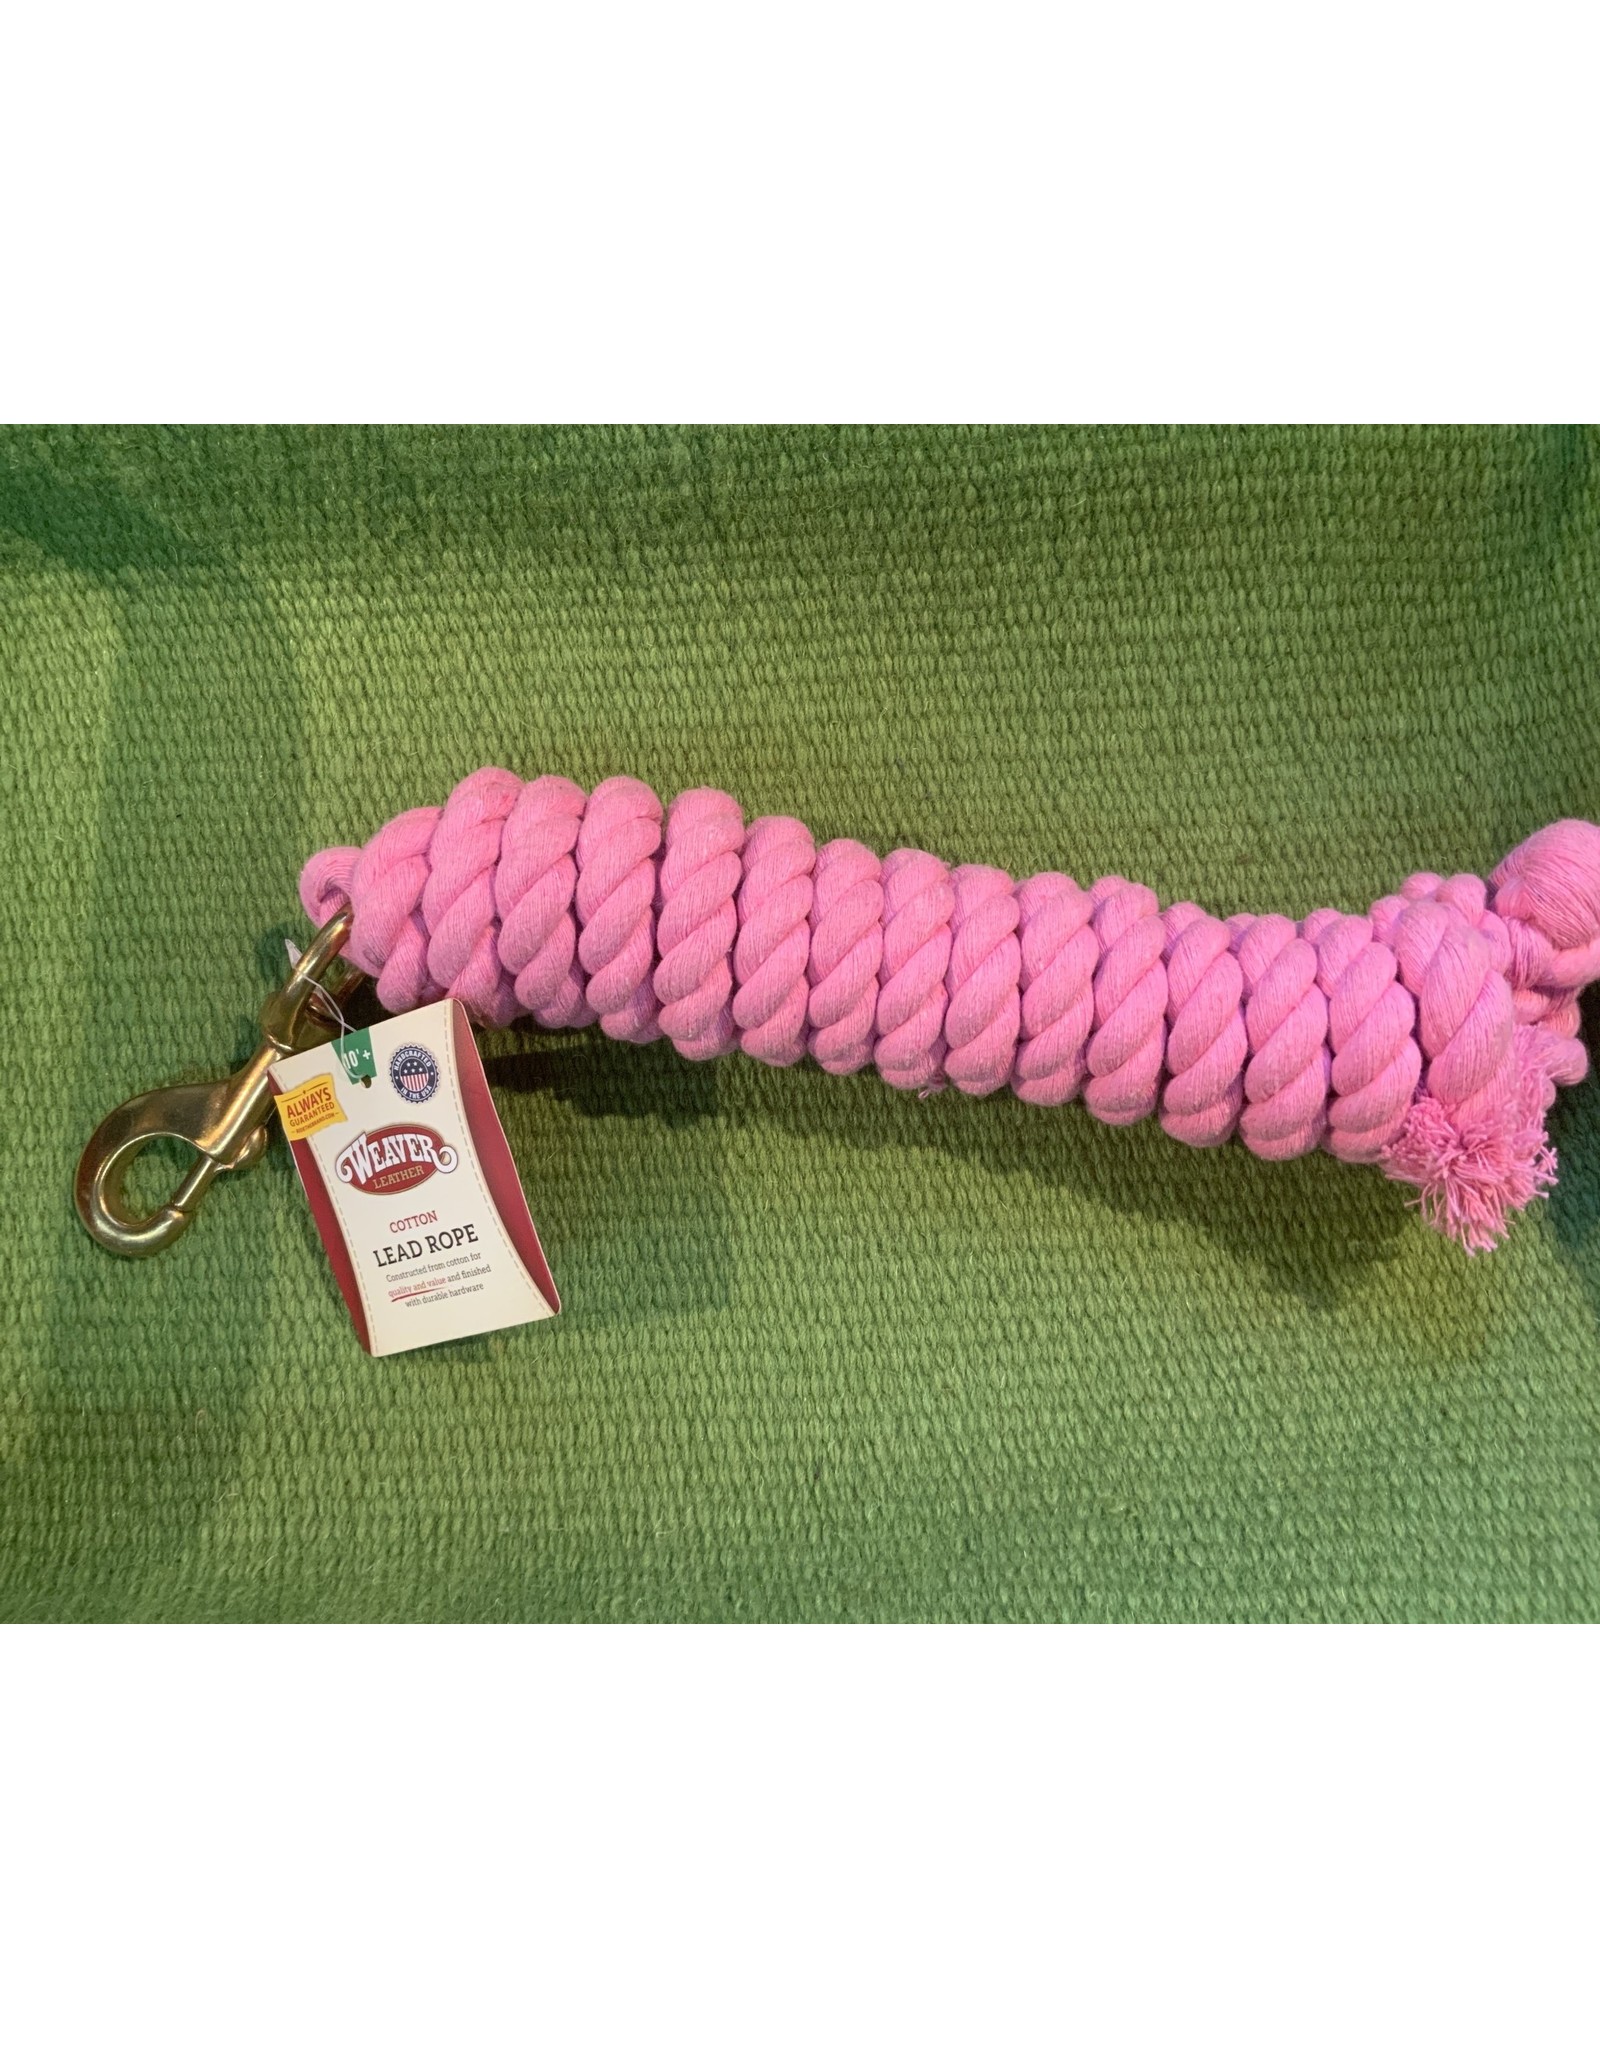 Weaver Colored Cotton Lead Ropes 10' - Pink 35-1910-PK